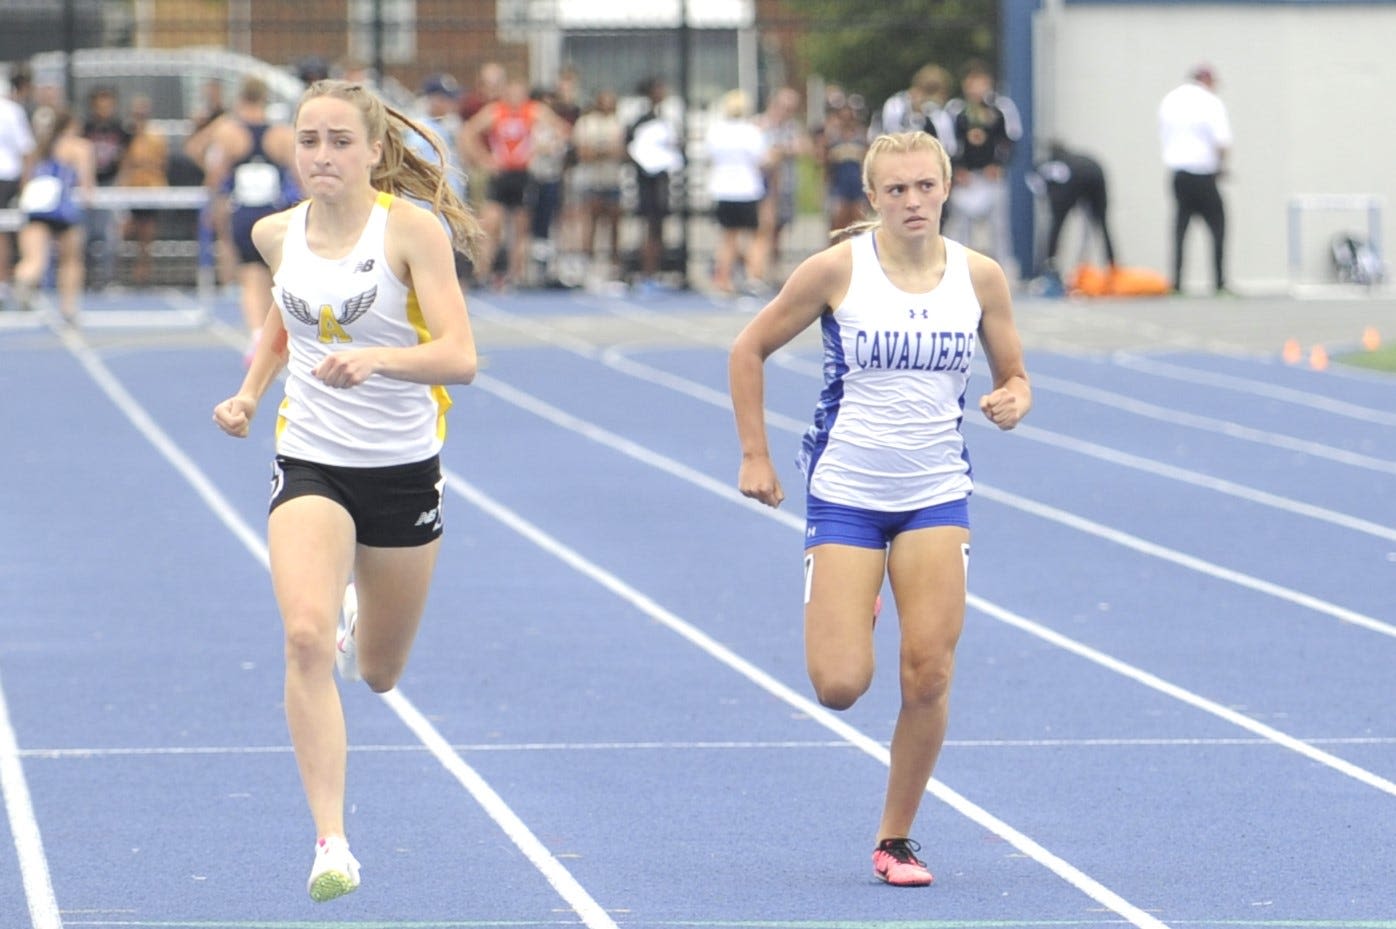 Chillicothe's Kiera Archer places seventh to make All-Ohio podium at state track and field meet